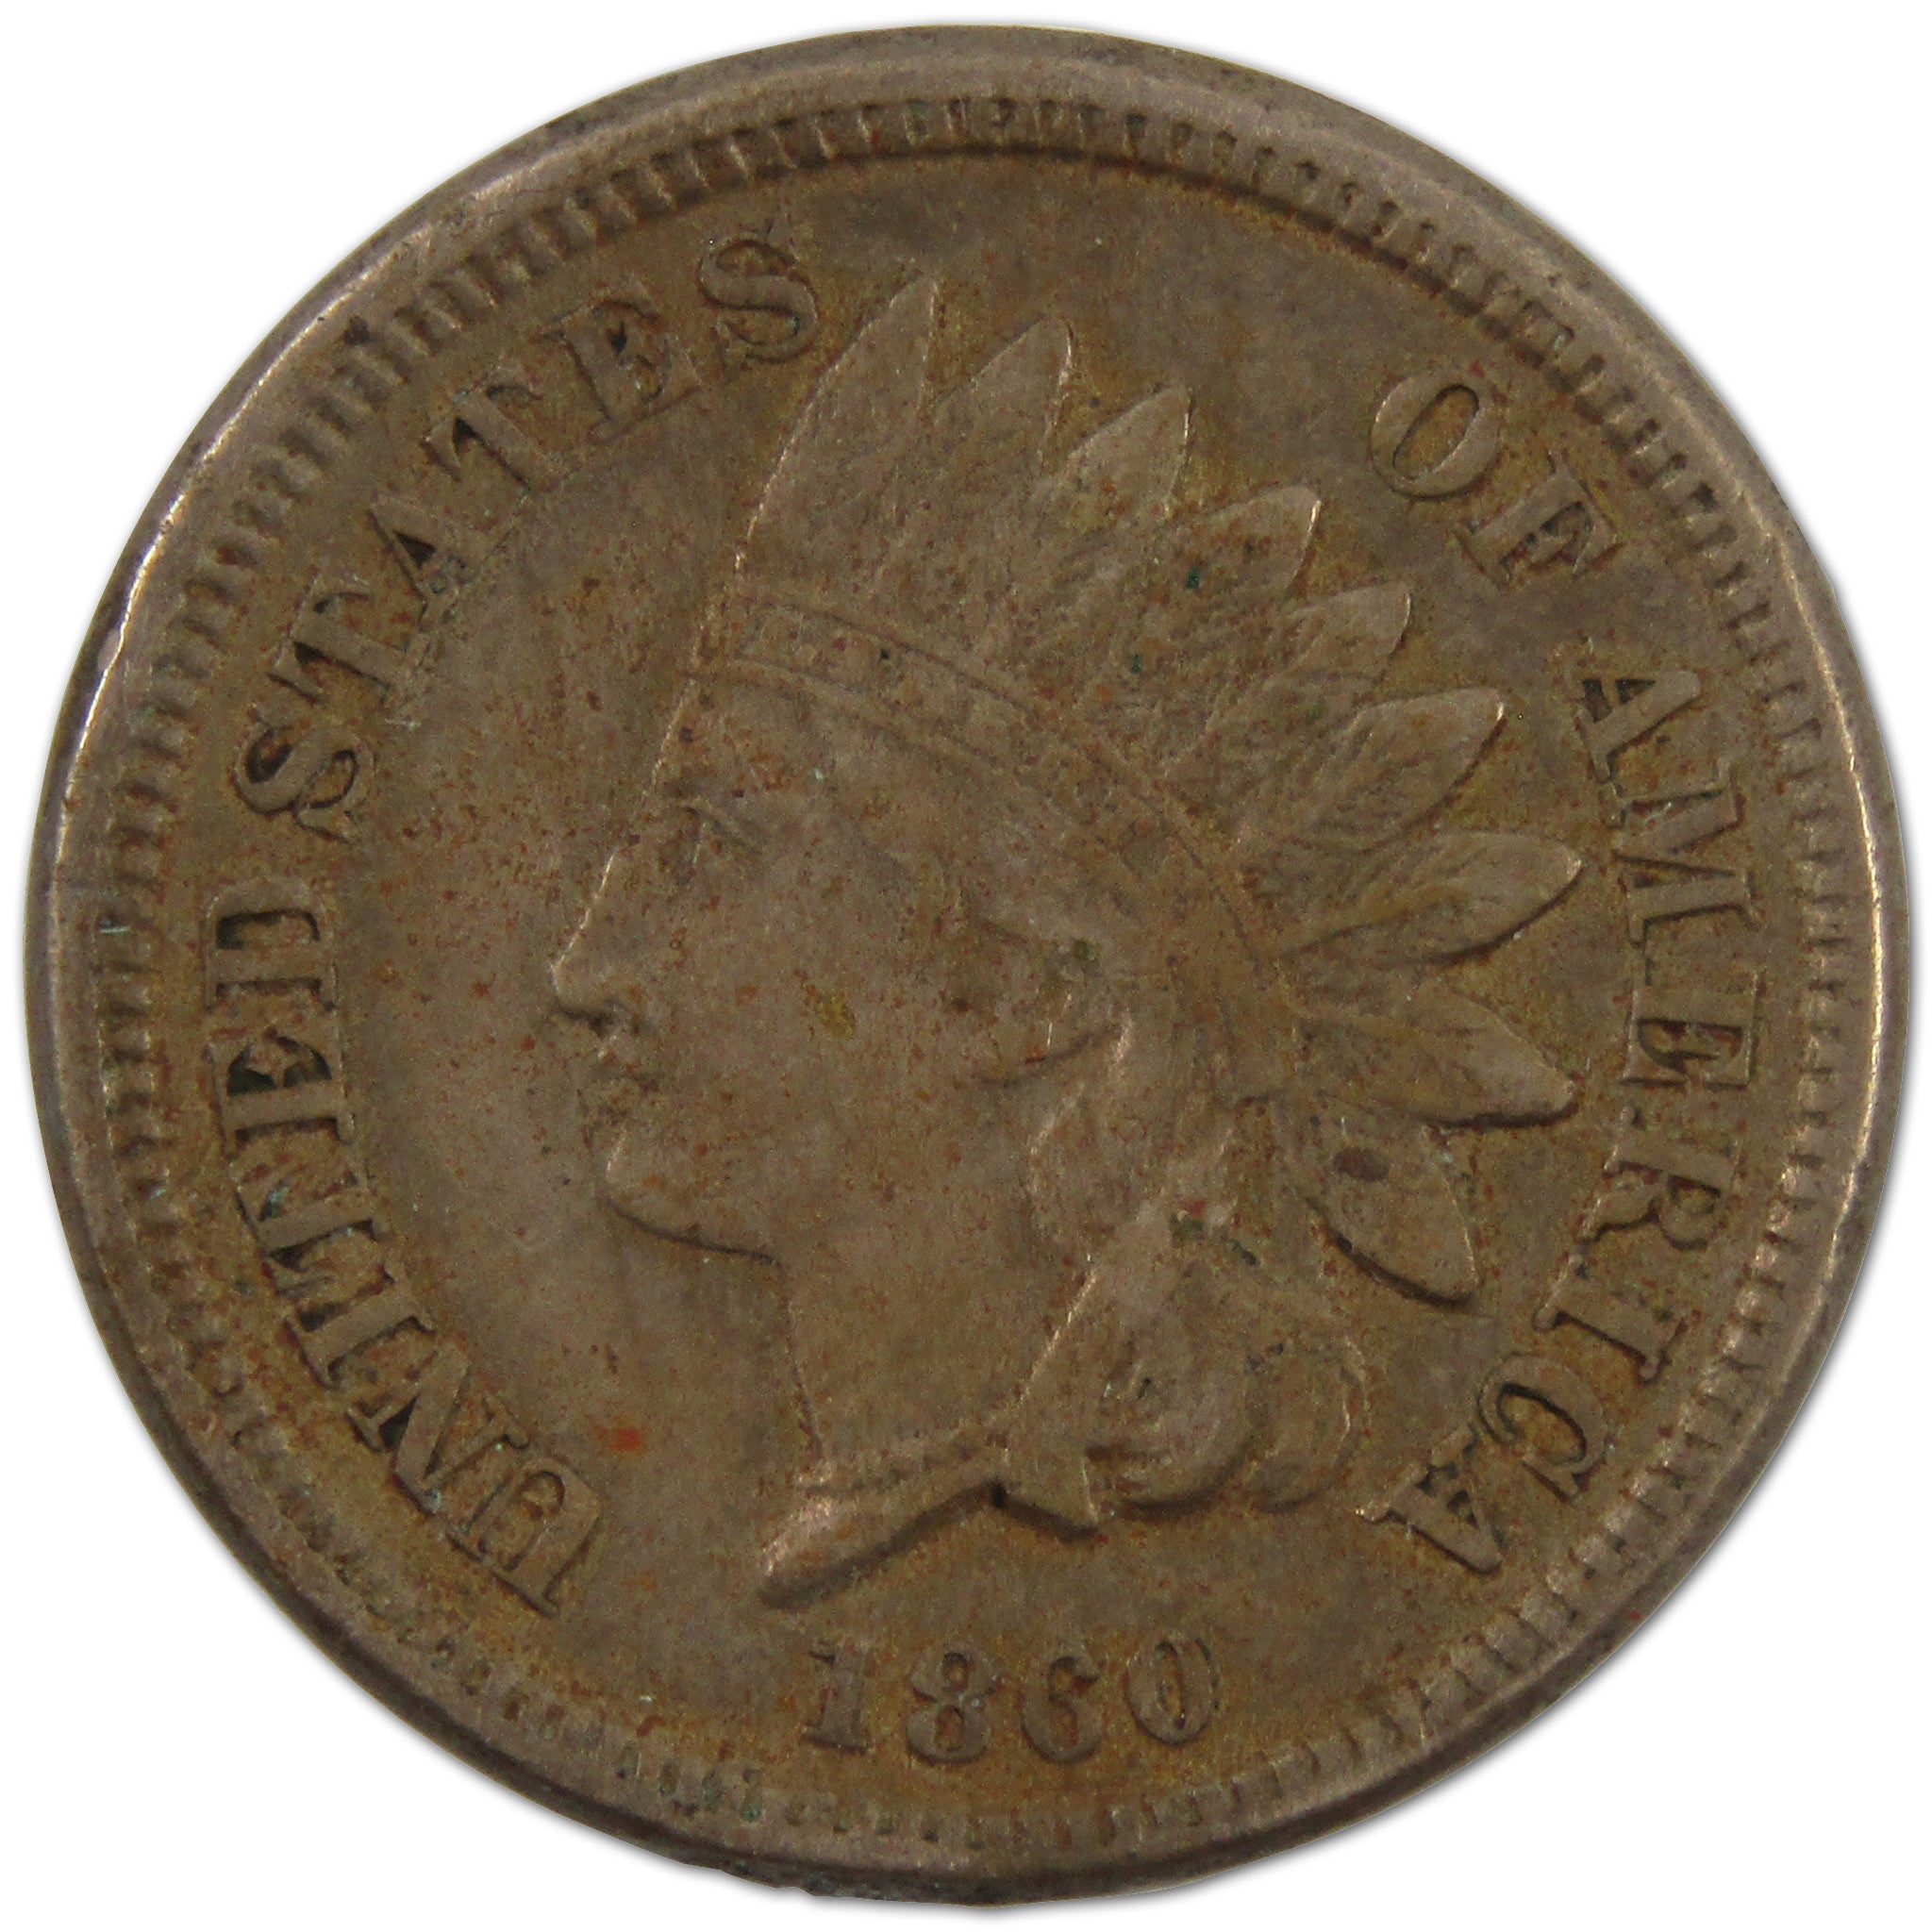 1860 Indian Head Cent XF EF Extremely Fine Copper-Nickel 1c SKU:I10530